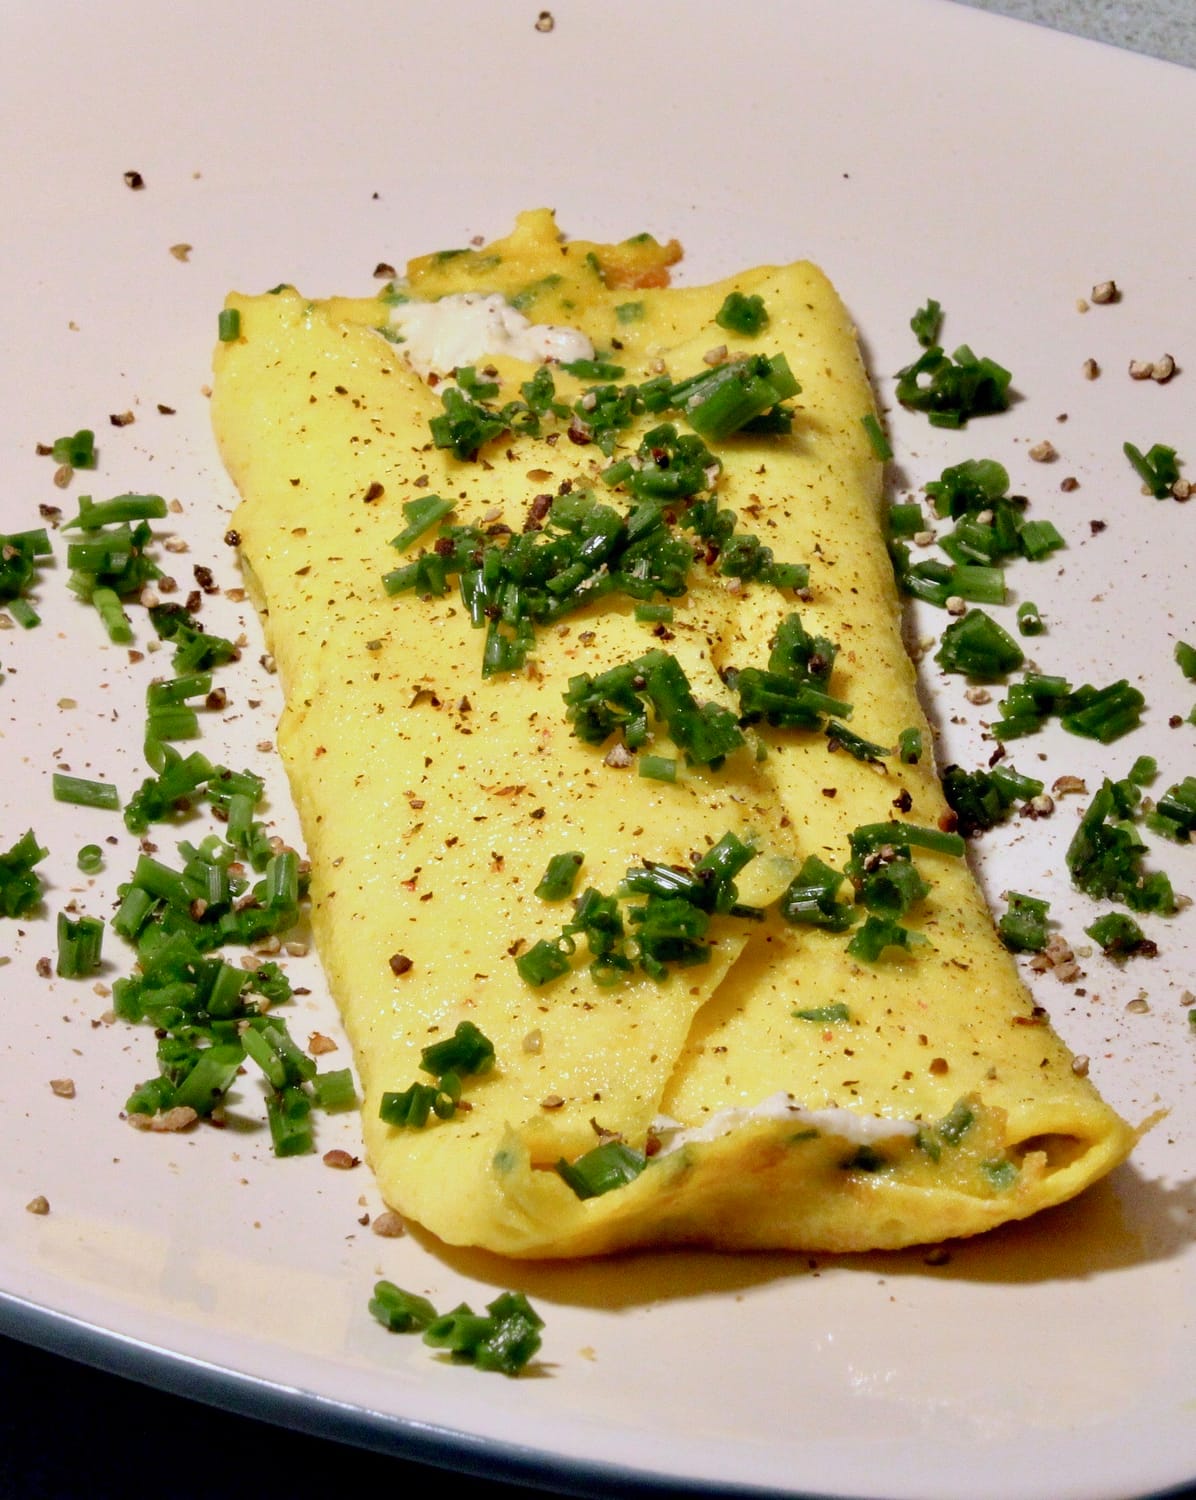 Fully plated and garnished French omelette.